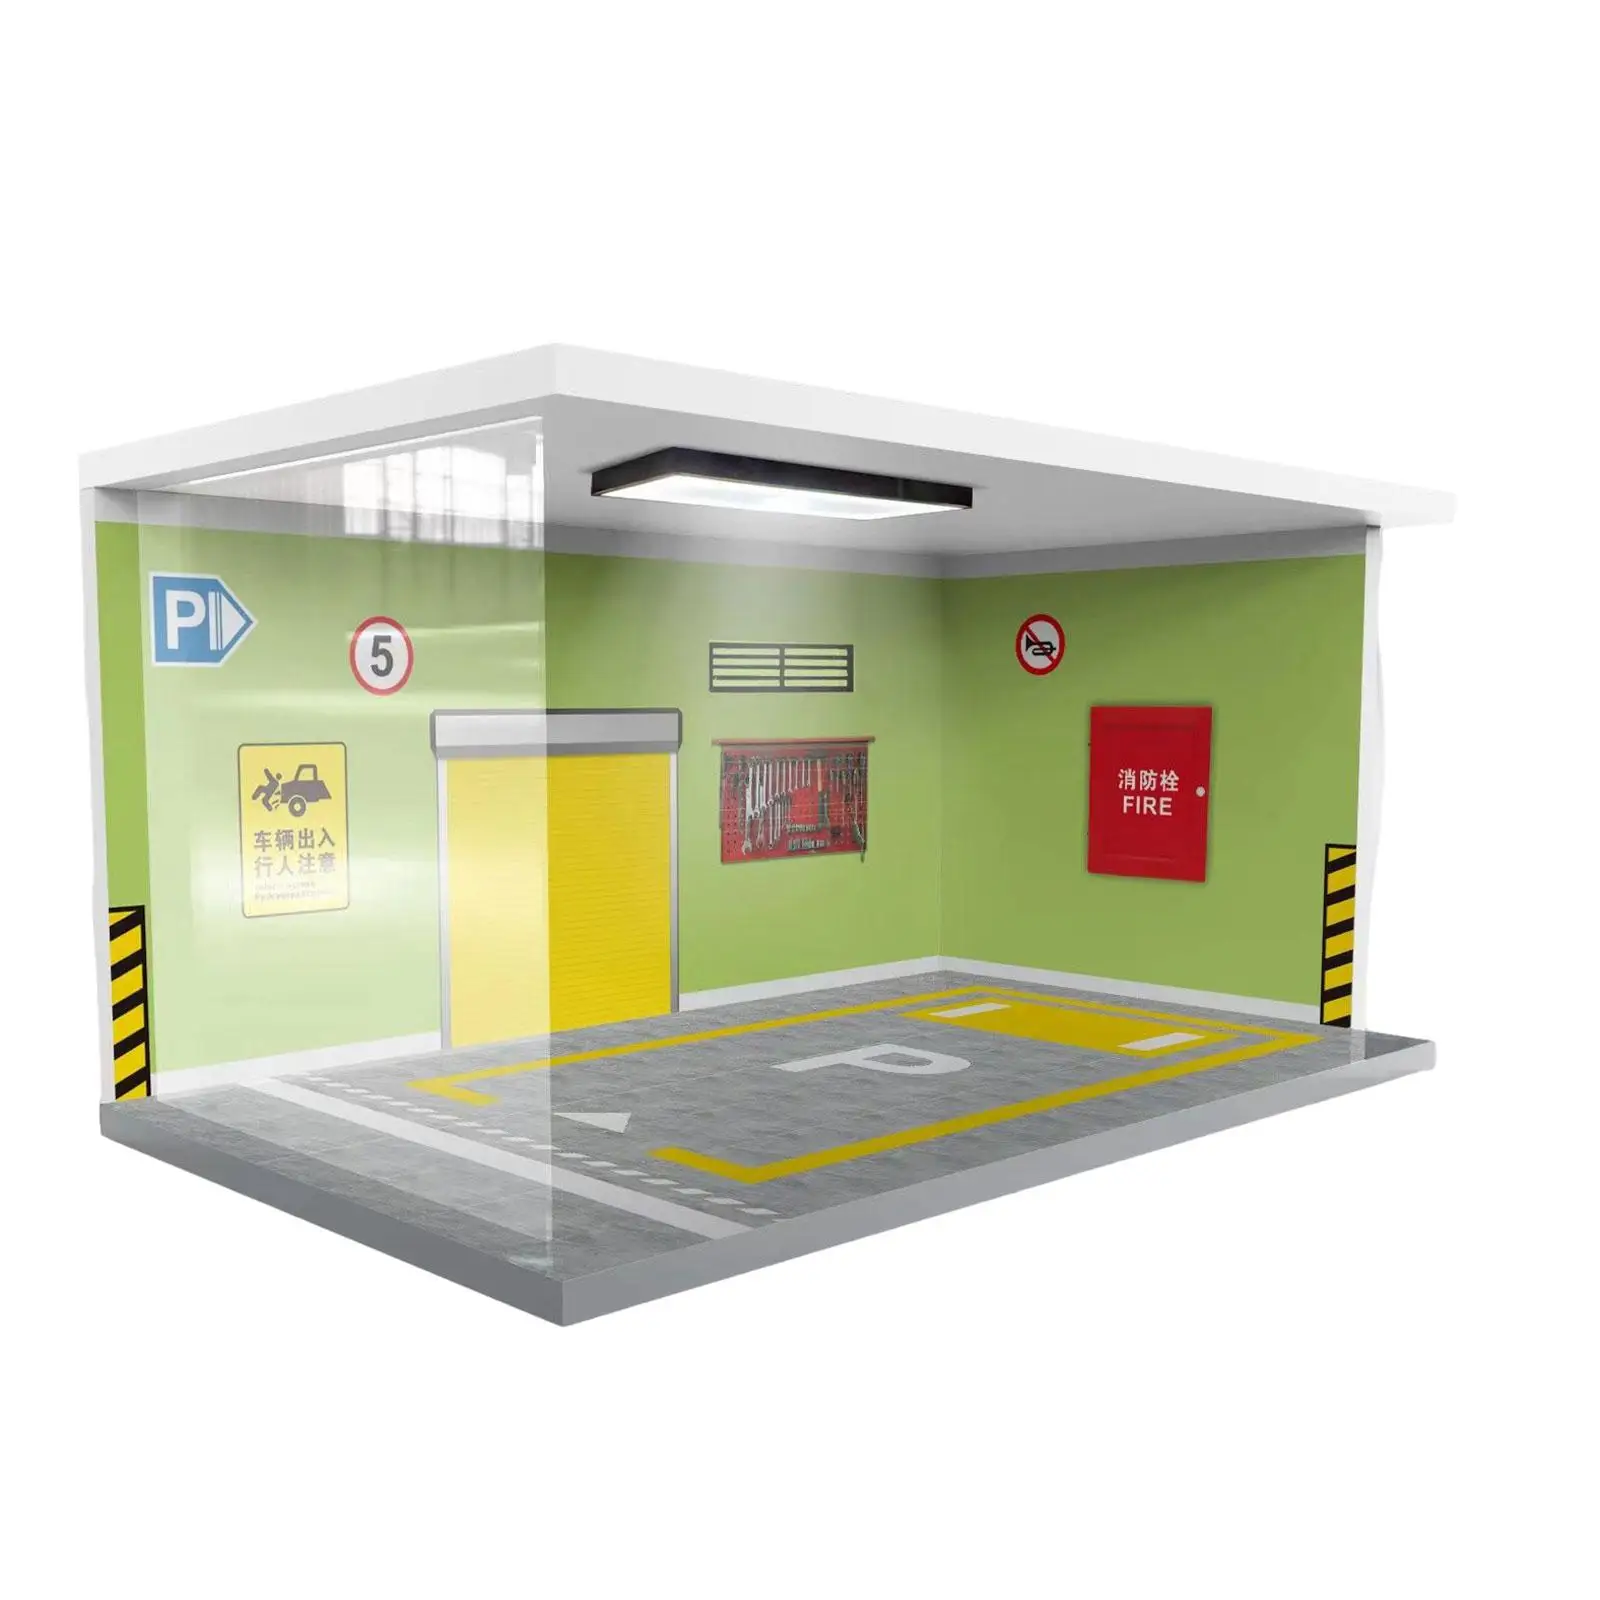 1:24 Parking Lot Scene Model with Acrylic Cover Countertop Display for Desktop Collection Display Model Car Decoration